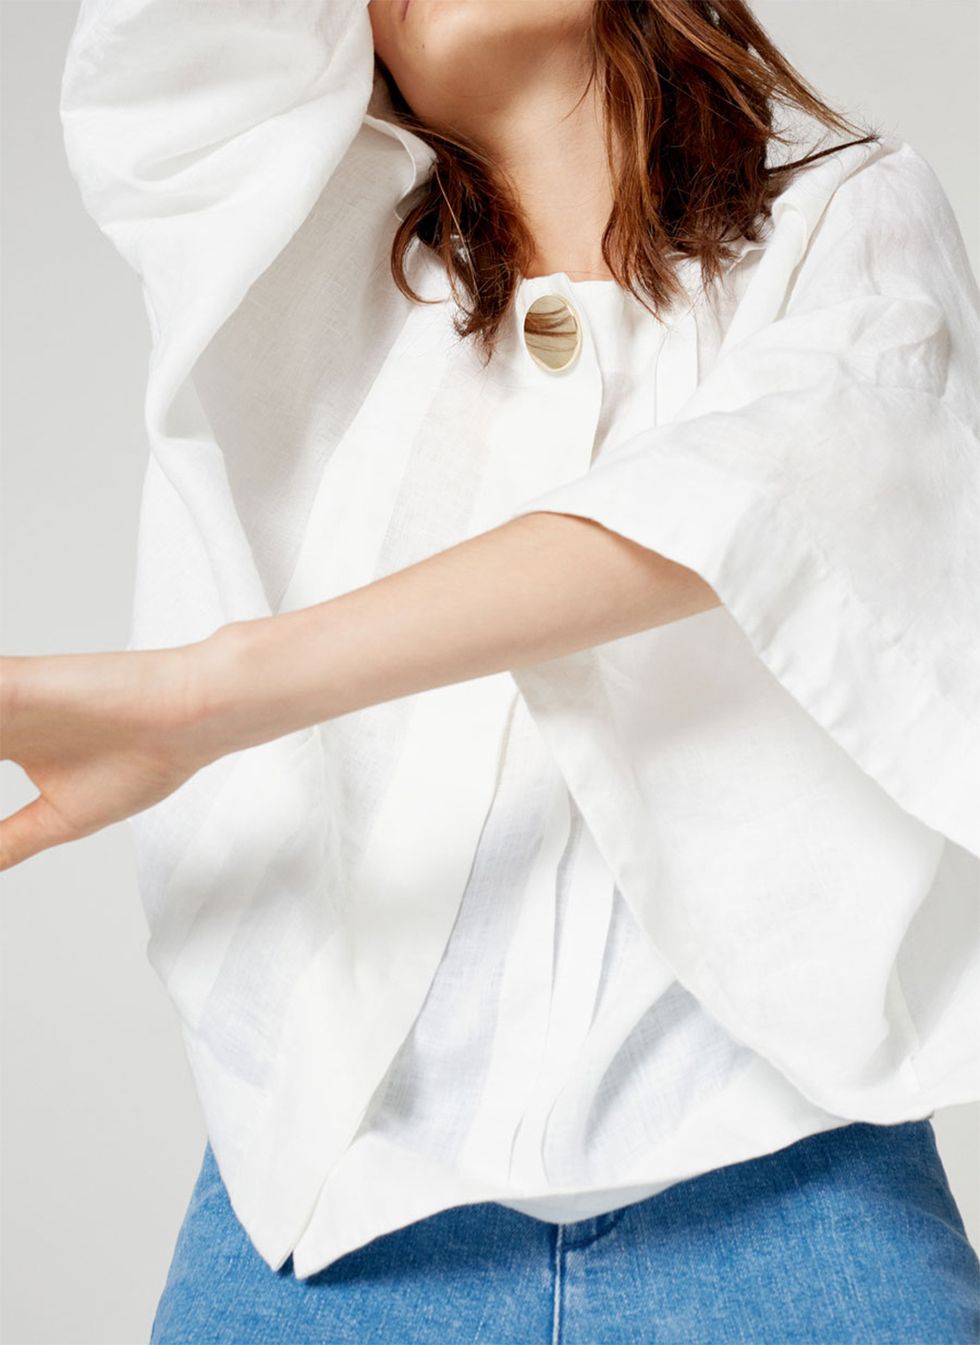 White, Clothing, Shoulder, Arm, Neck, Blouse, Joint, Sleeve, Photo shoot, Top, 